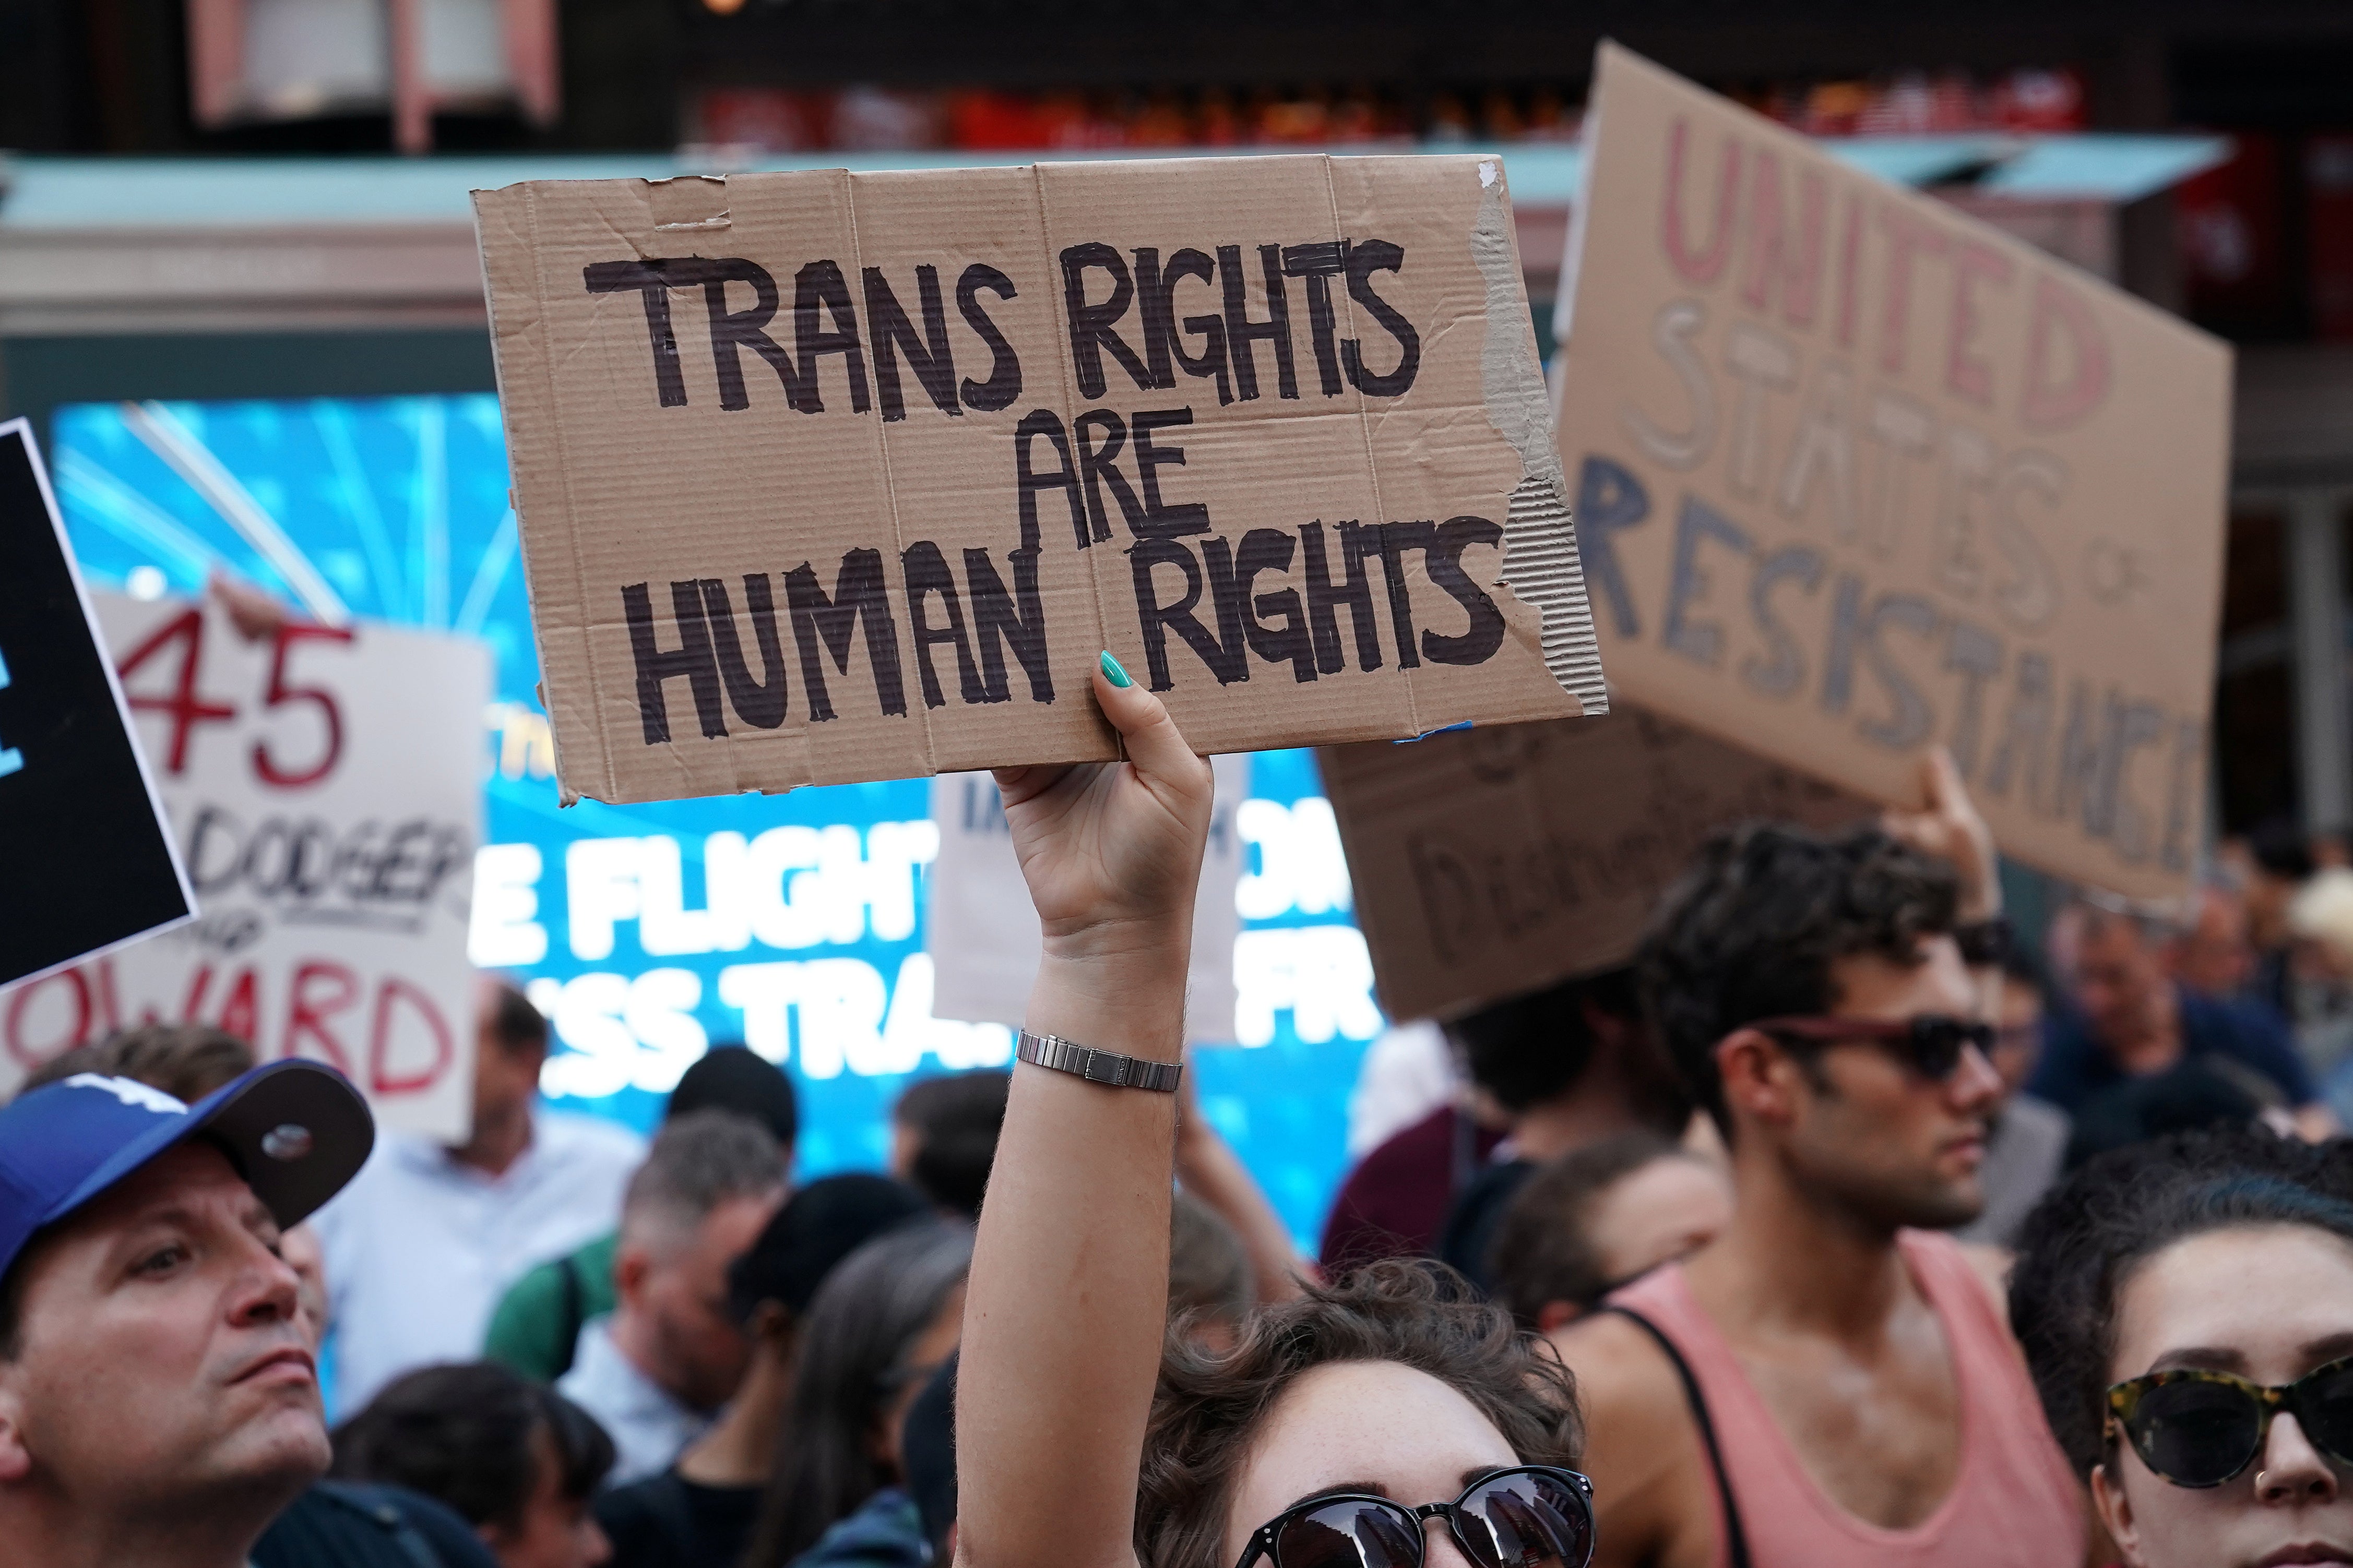 People protest President Donald Trump's announcement that he plans to reinstate a ban on transgender individuals from serving in any capacity in the U.S. military, in Times Square, New York on July 26, 2017. 